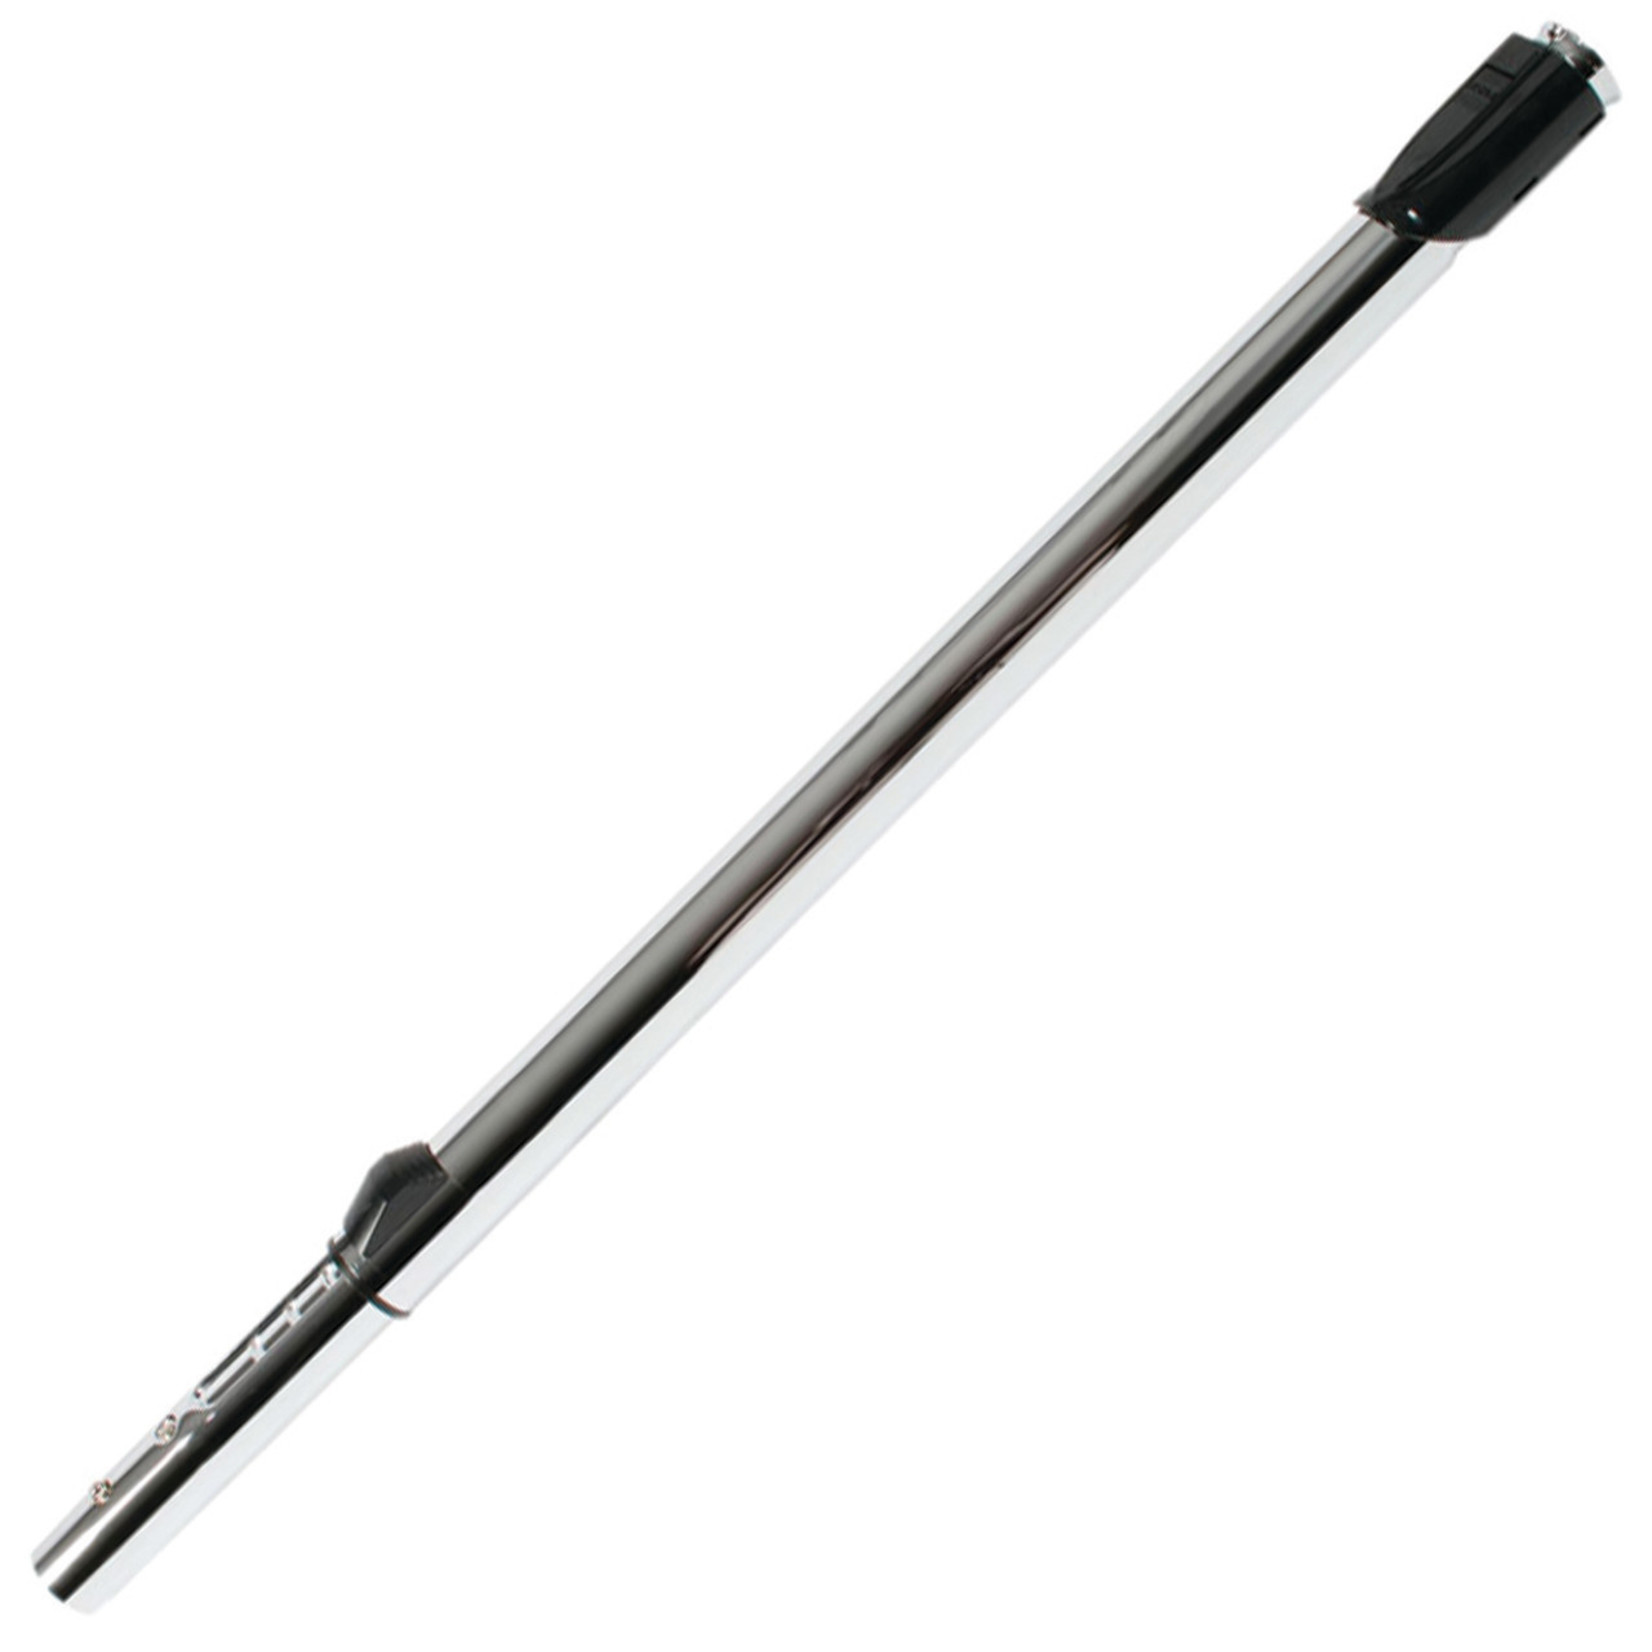 Centec Central Vacuum Button to Button, Chromed Steel Telescopic Wand